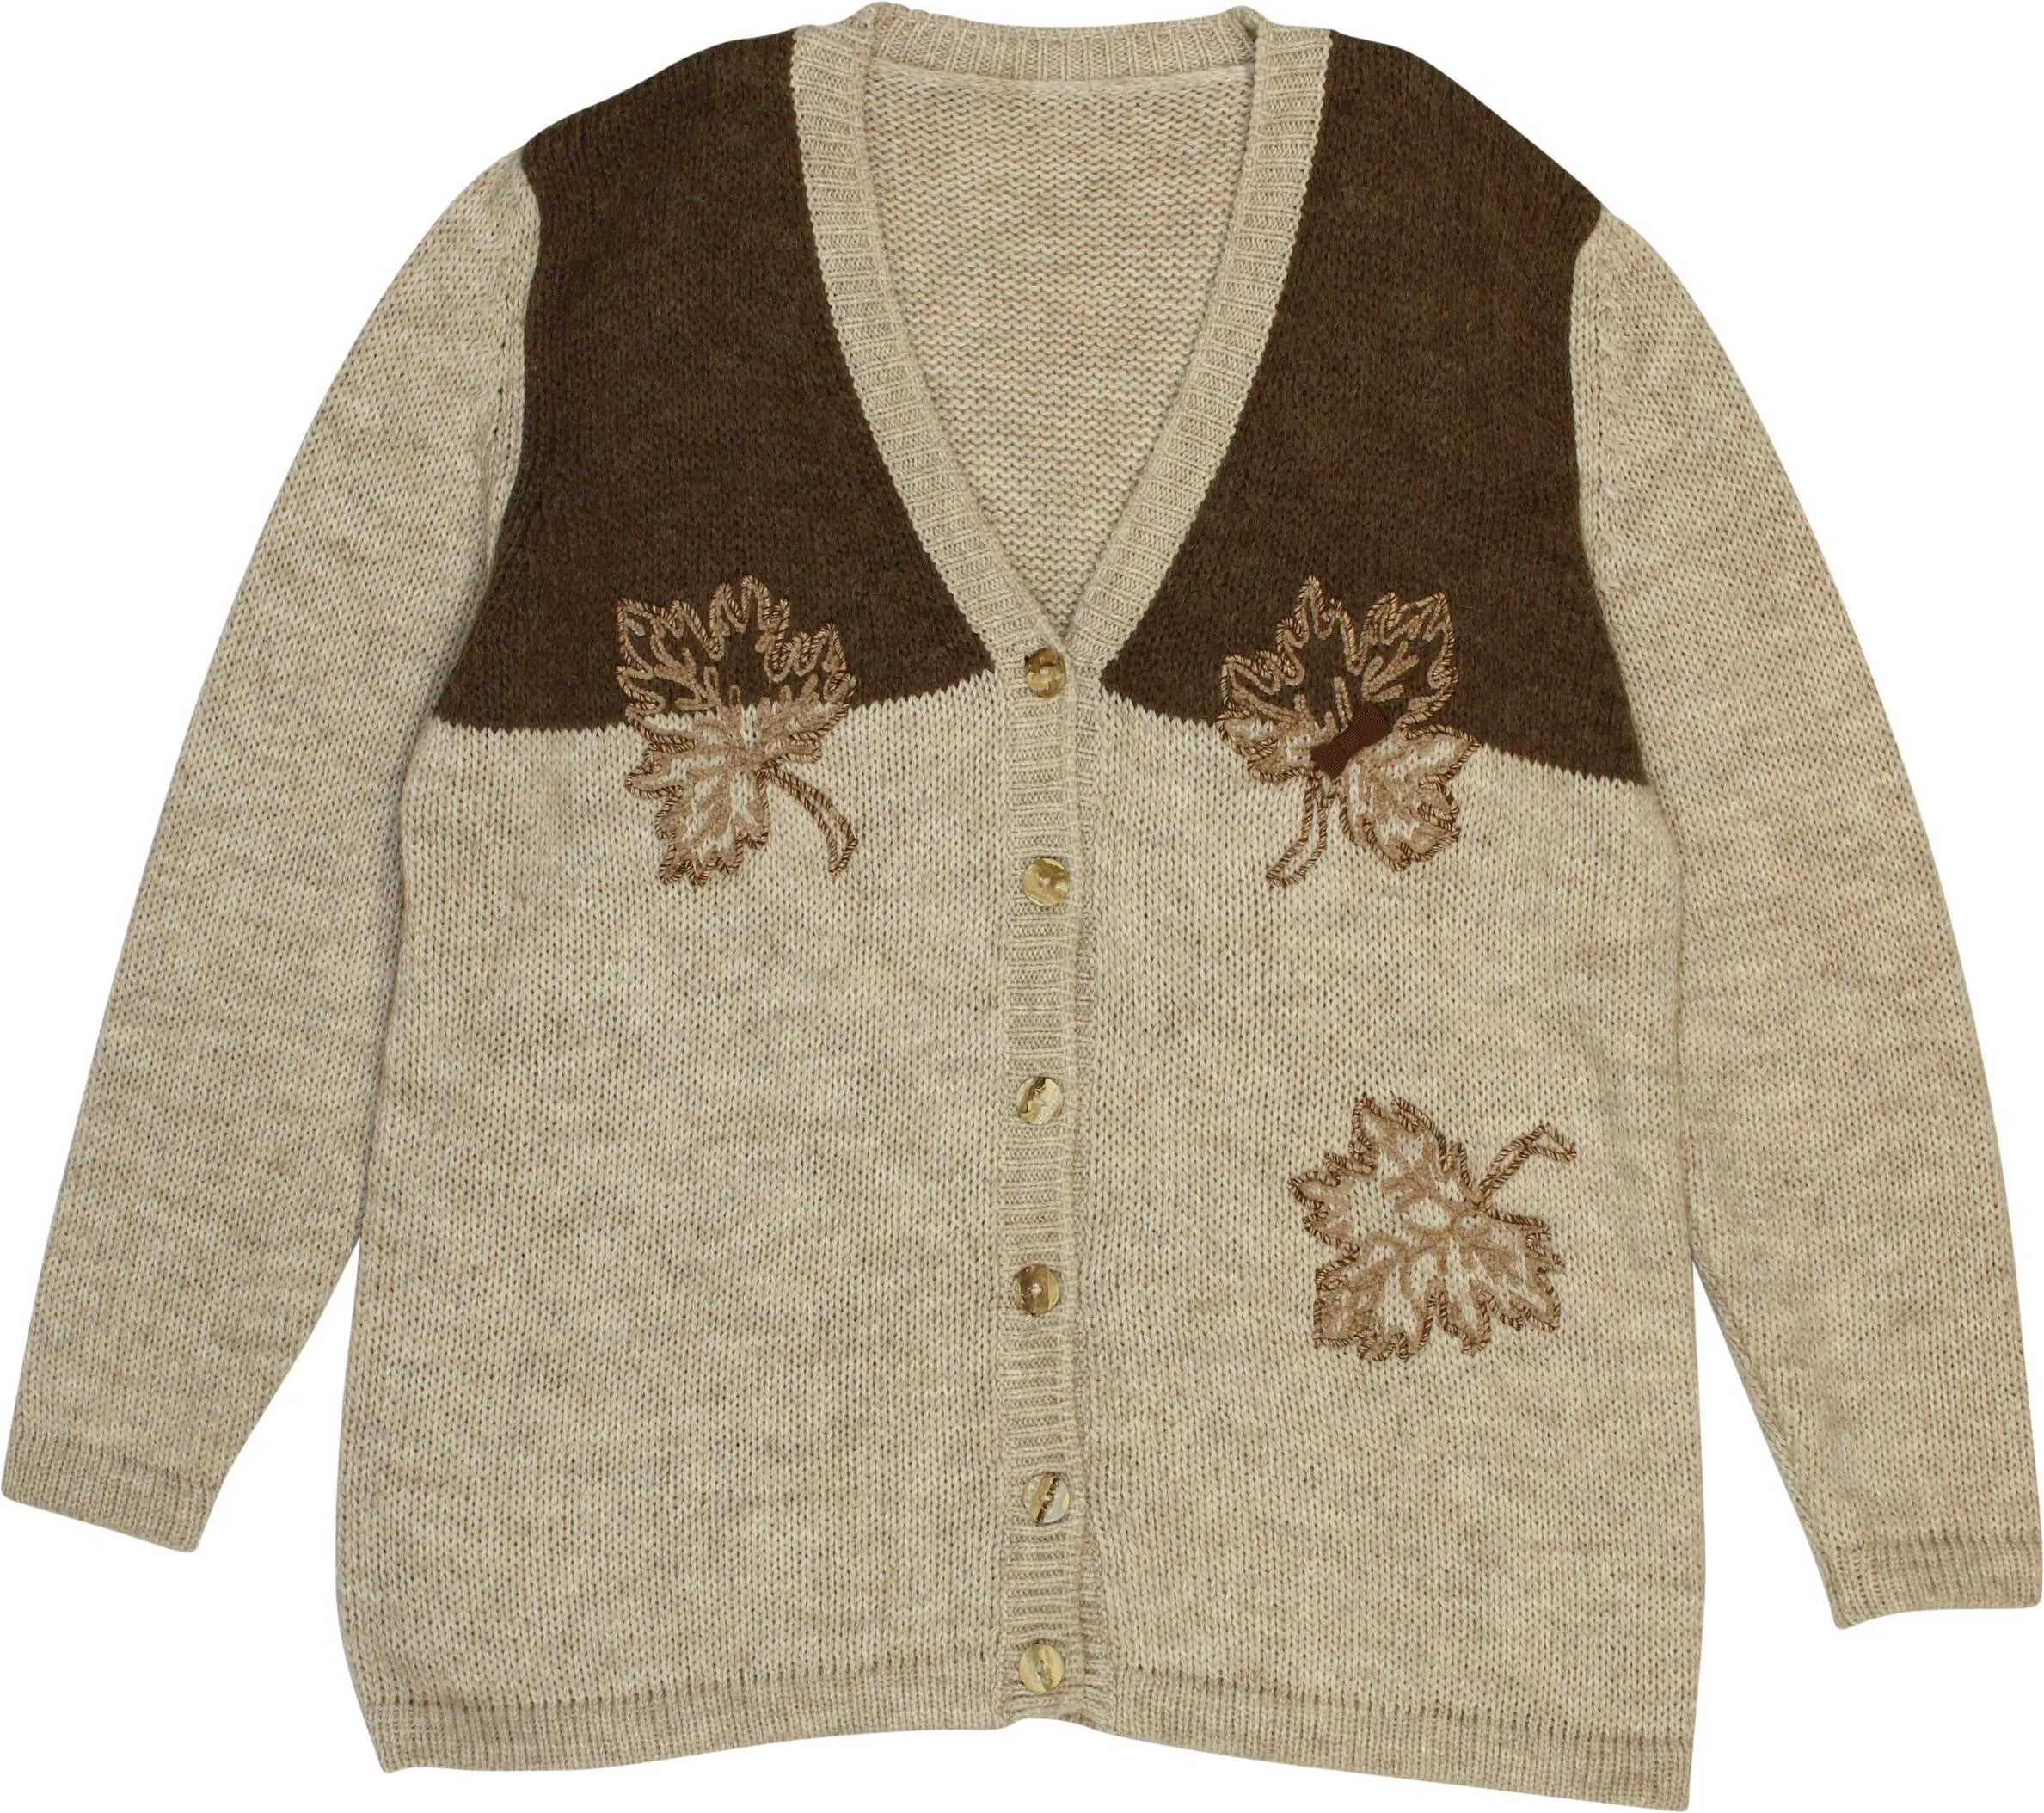 Unknown - Beige Cardigan- ThriftTale.com - Vintage and second handclothing